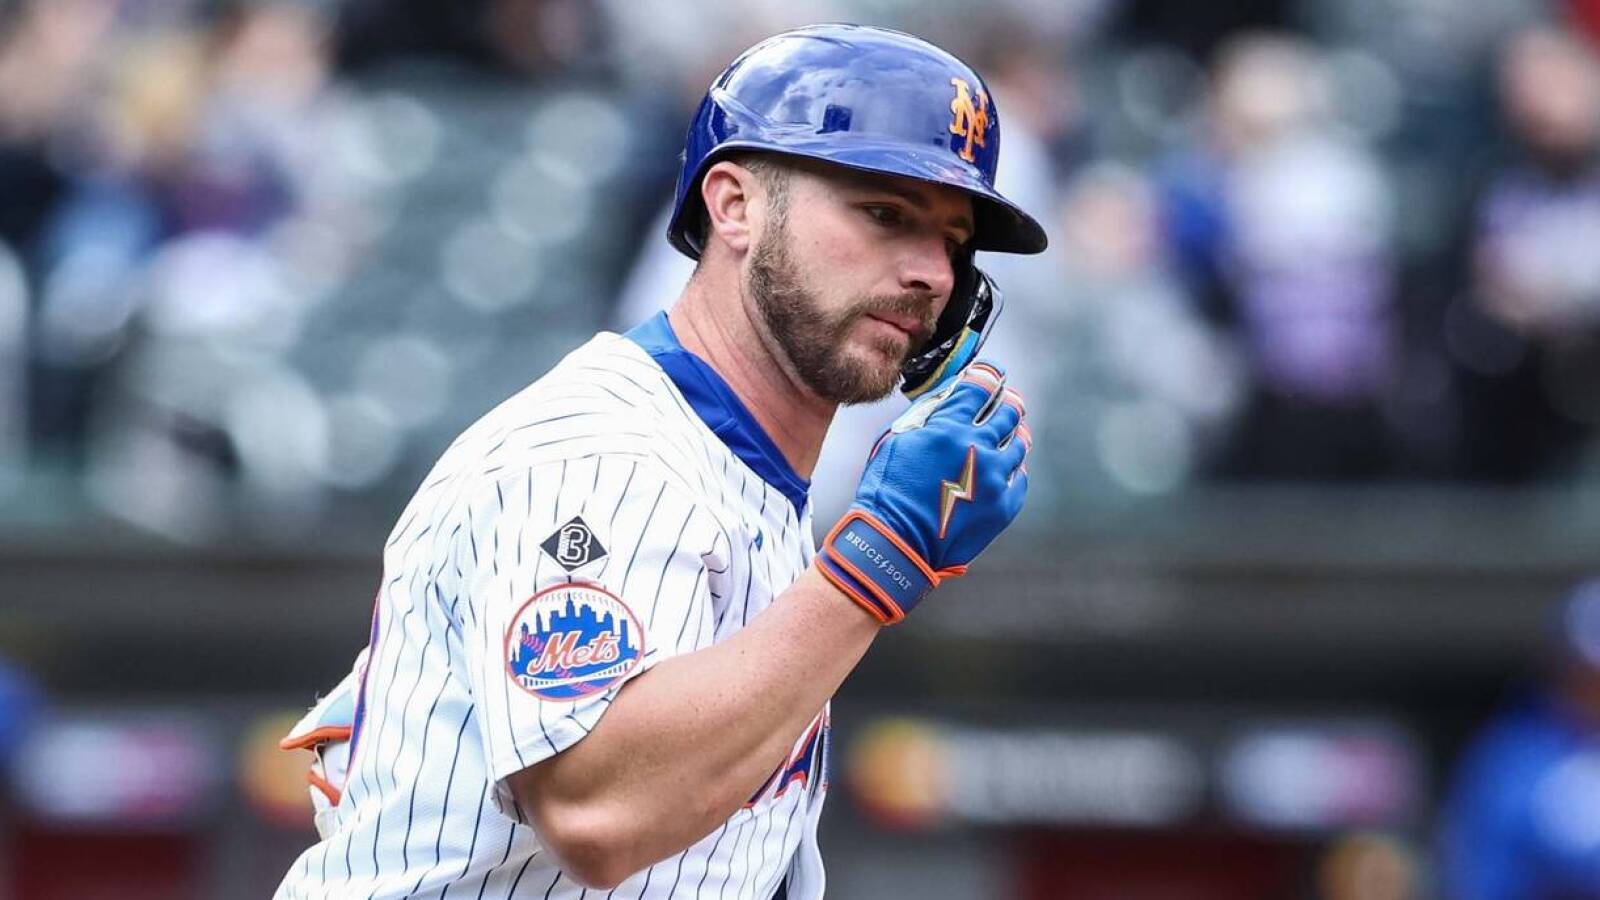 Pete Alonso addresses possibly spending entire career with Mets